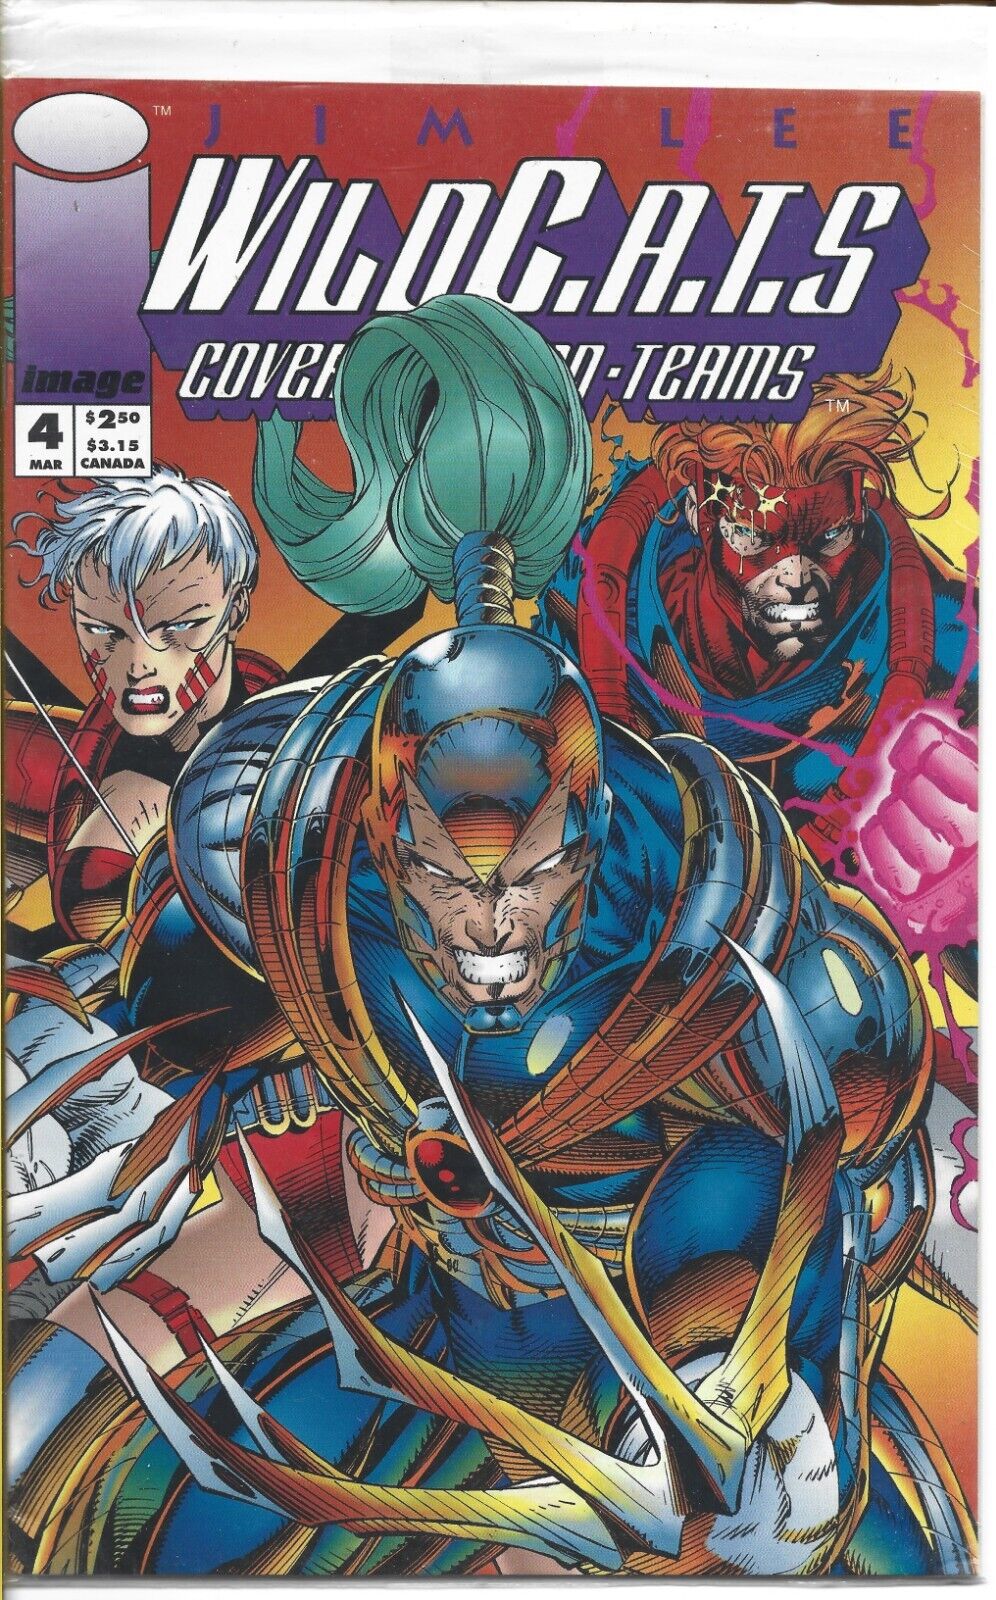 WILDC.A.T.S: COVERT ACTION TEAM #4 NEW SEALED POLYBAG W/CARD IMAGE 1993 B & B